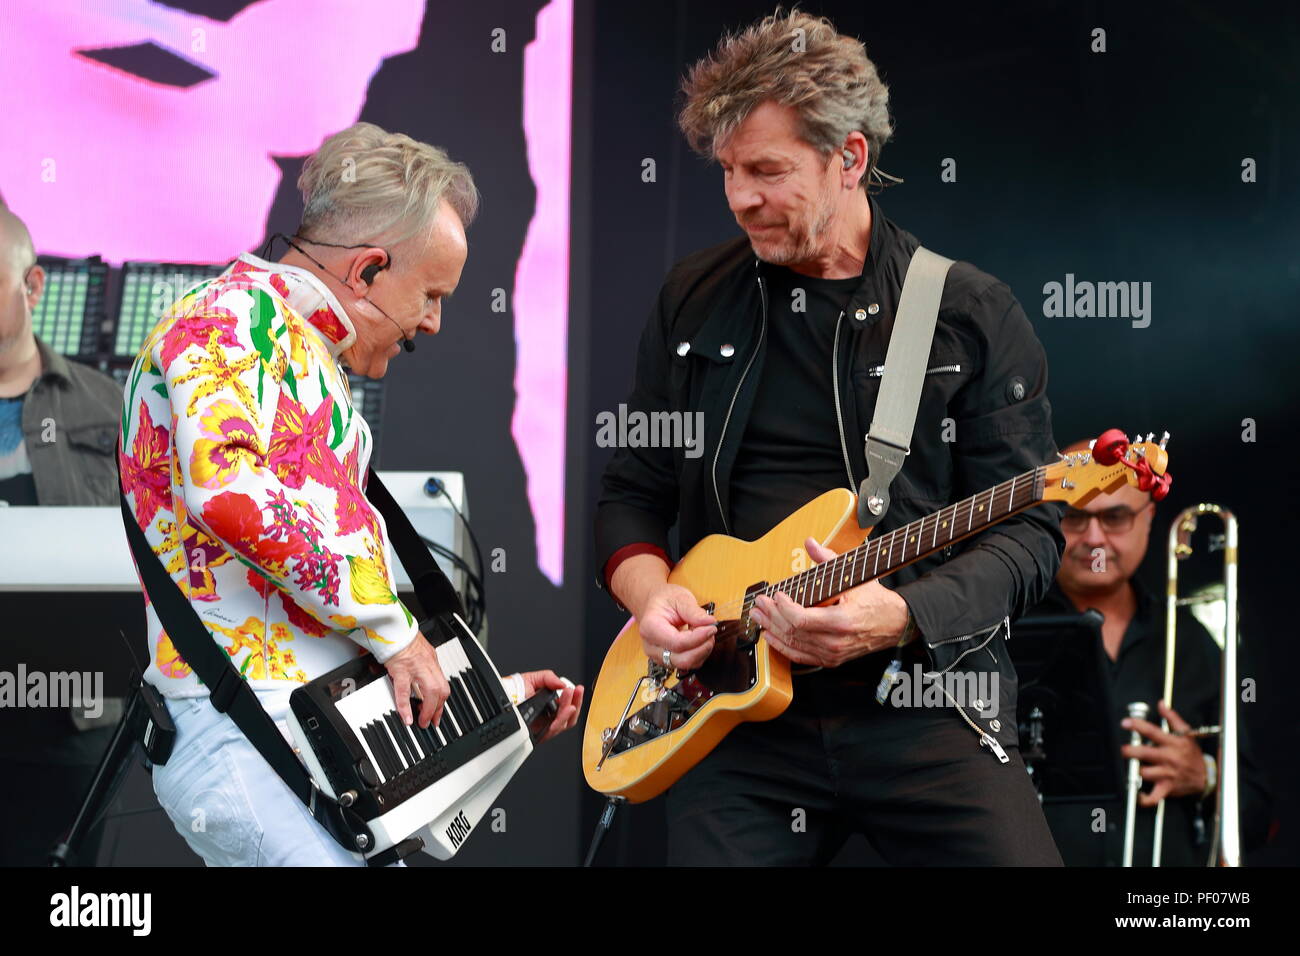 Henley-On-Thames, UK. 18th August 2018. Henley-On-Thames, UK. 18th August 2018.The Rewind Festival South in Henley-on-Thames on the first day attracted thousands of fans who dressed up for the occasion. On stage were singers and groups from the 80's. These included The Jam, former ELO members, Howard Jones, Billy Ocean, Odyssey,Jason Donovan, Nik Kershaw, Midge Ure, Marc Almond, Shalamar and Kool & the Gang. Credit: Uwe Deffner/Alamy Live News Credit: Uwe Deffner/Alamy Live News Credit: Uwe Deffner/Alamy Live News Stock Photo